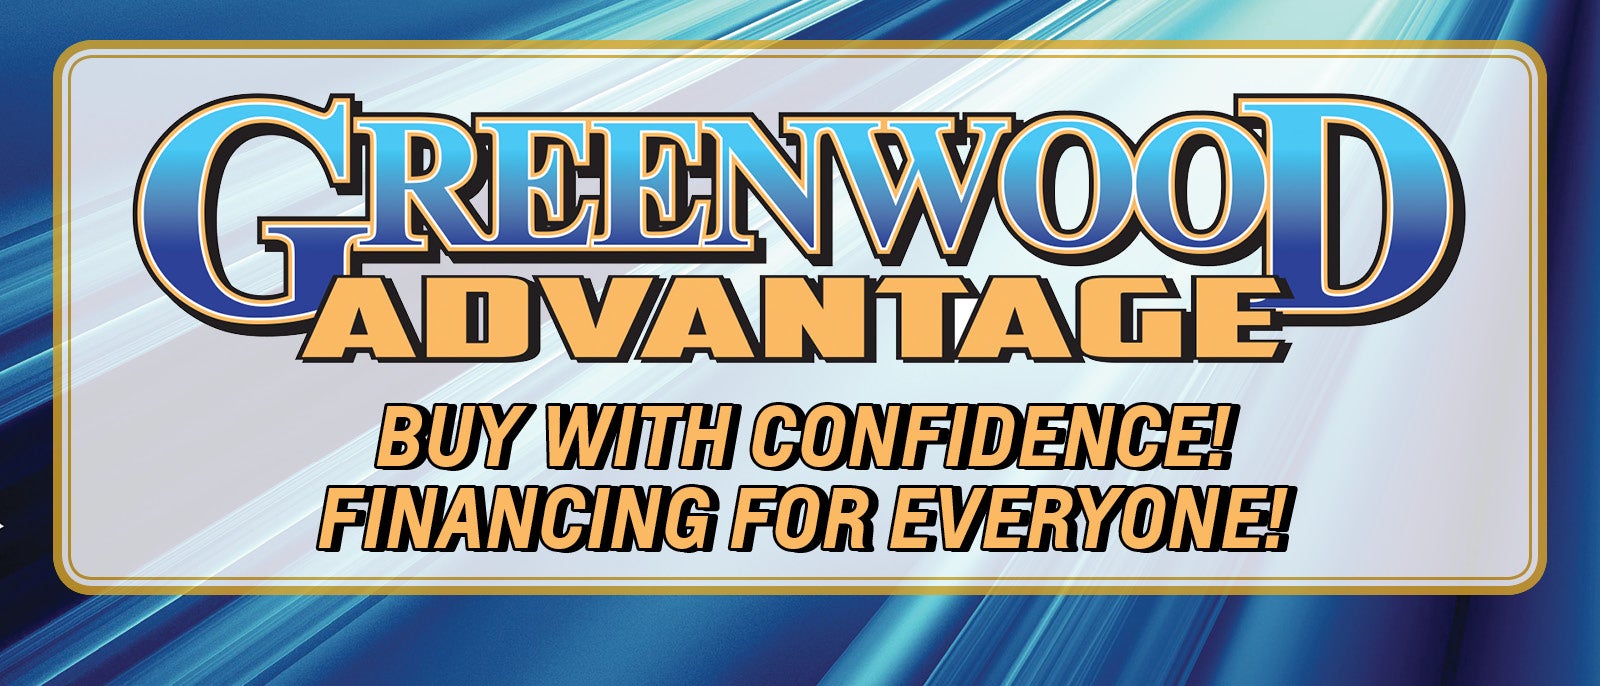 Learn More About the Greenwood Advantage